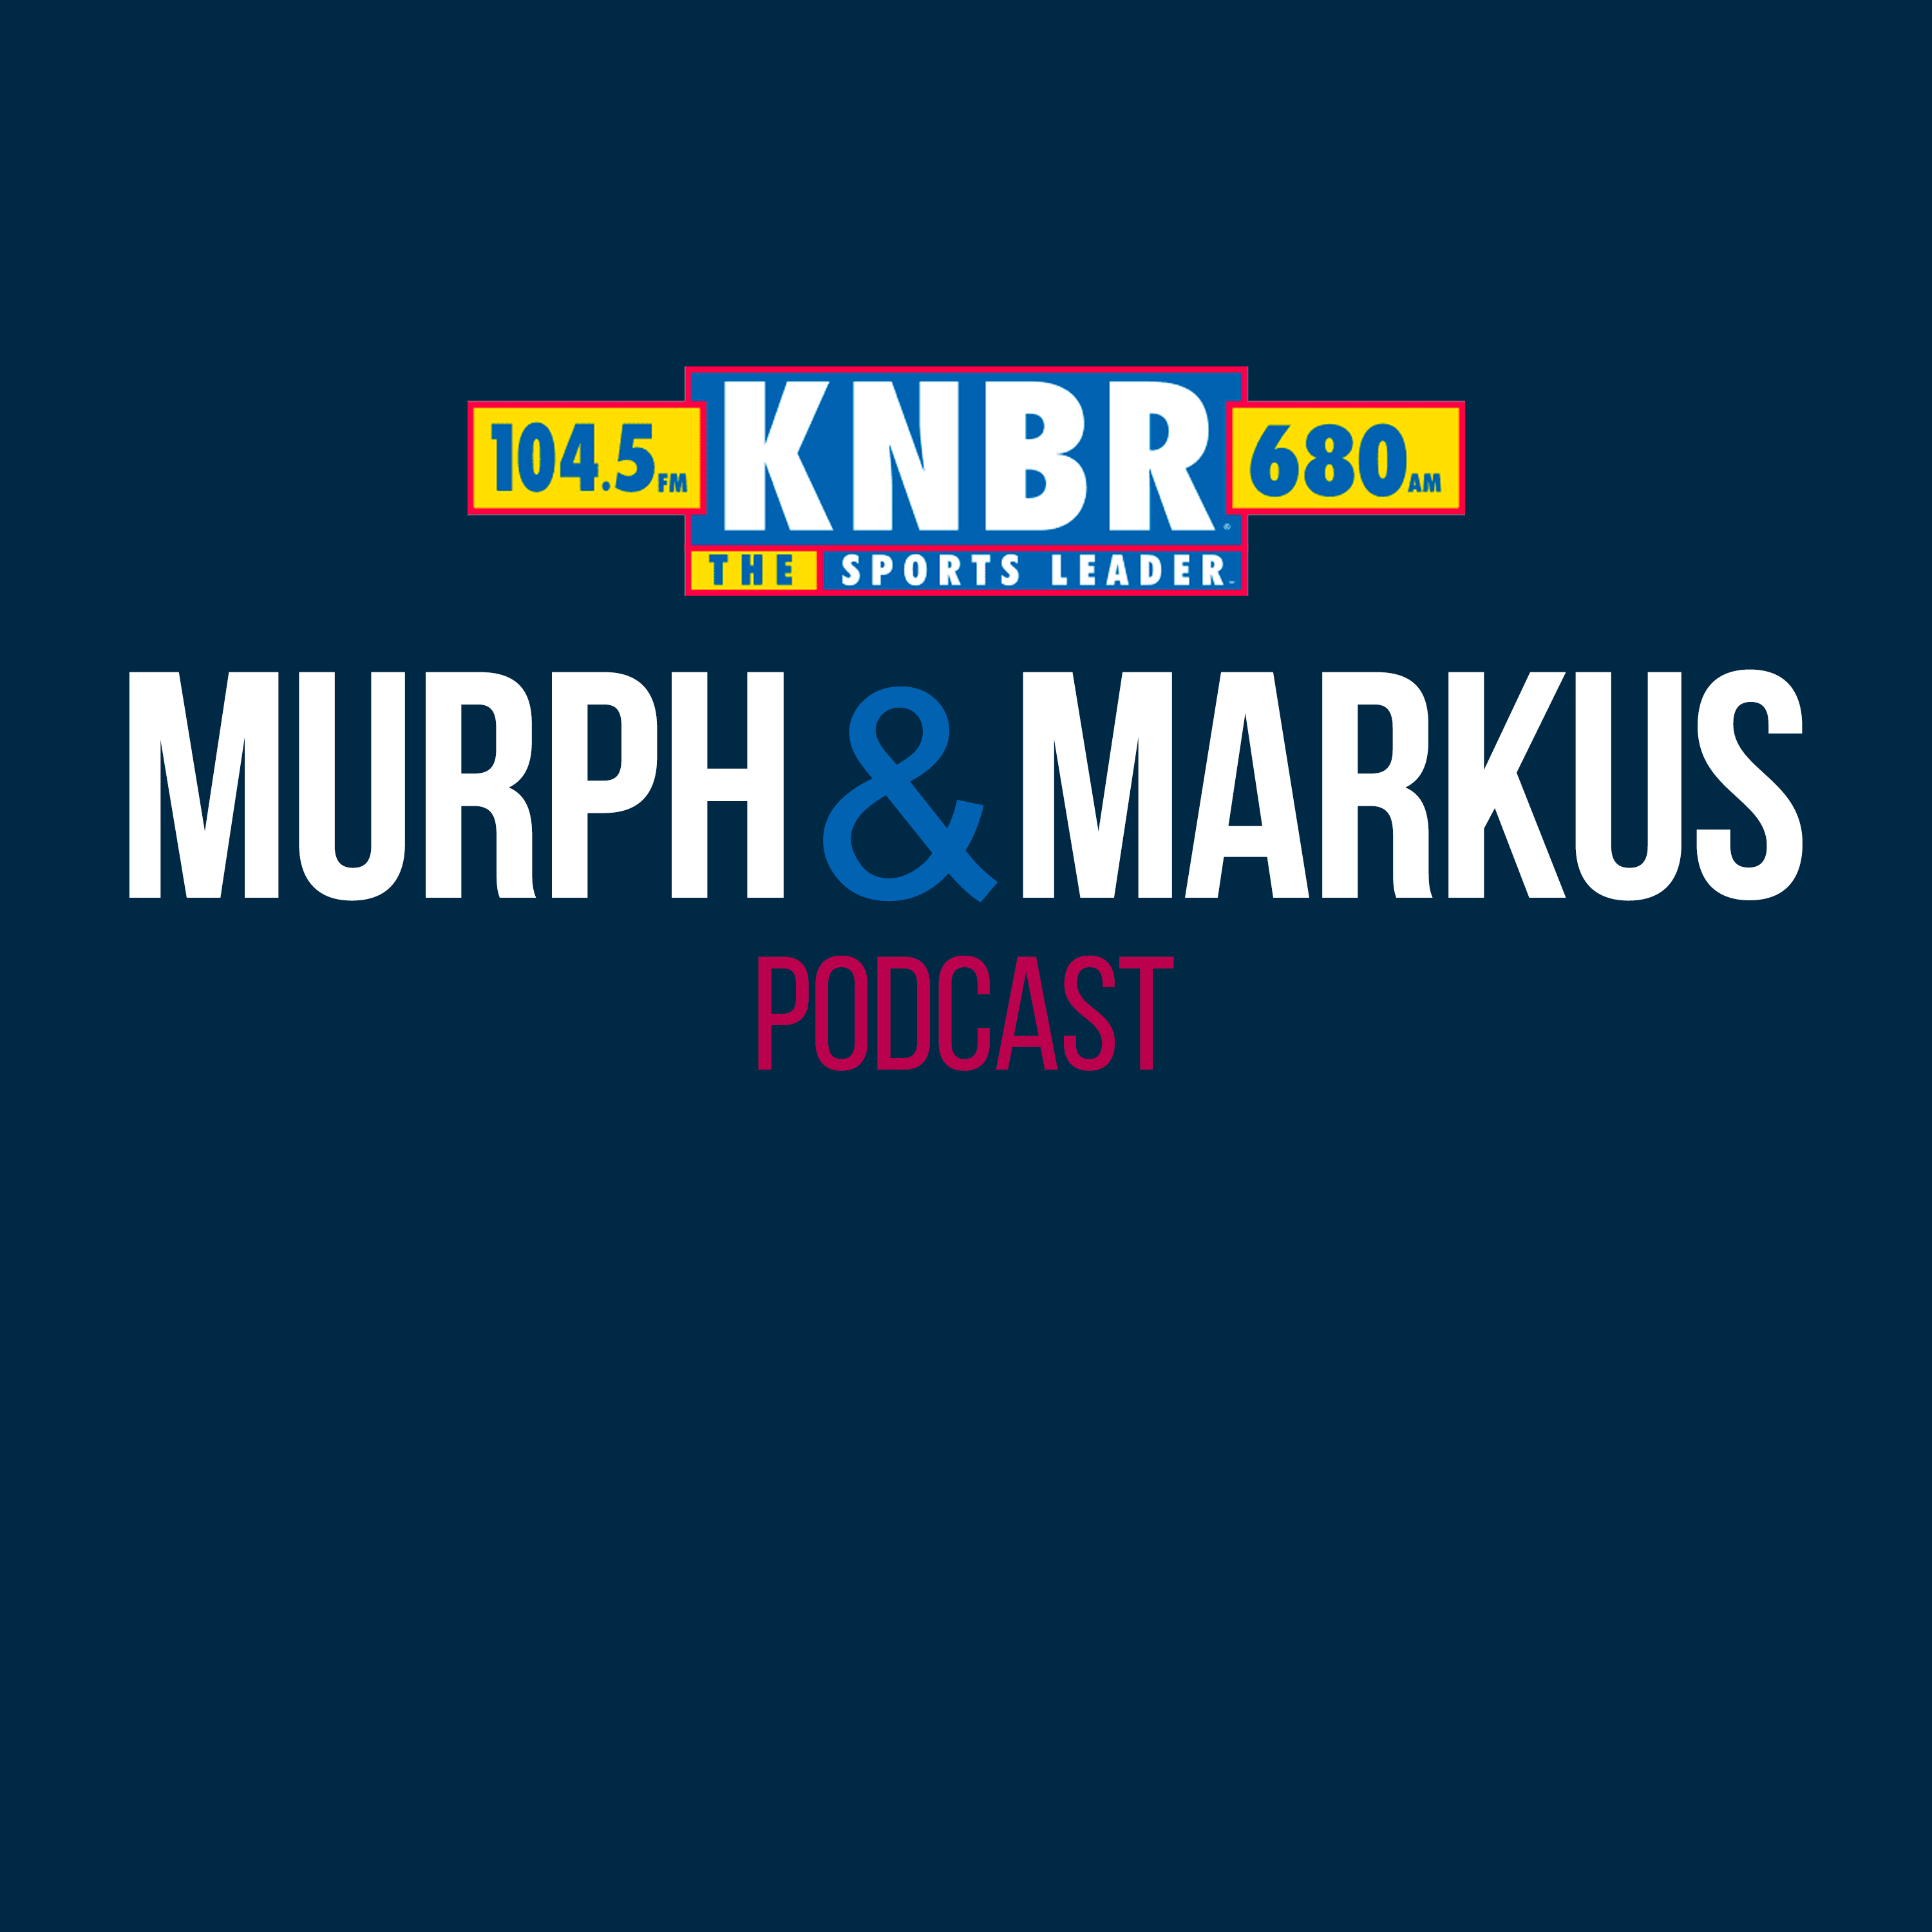 6-14 Hour 3: Murph & Markus talk to Susan Slusser, dive into the Cooler of Content, and react to more of Farhan Zaidi's comments about Luis Matos & Austin Slater